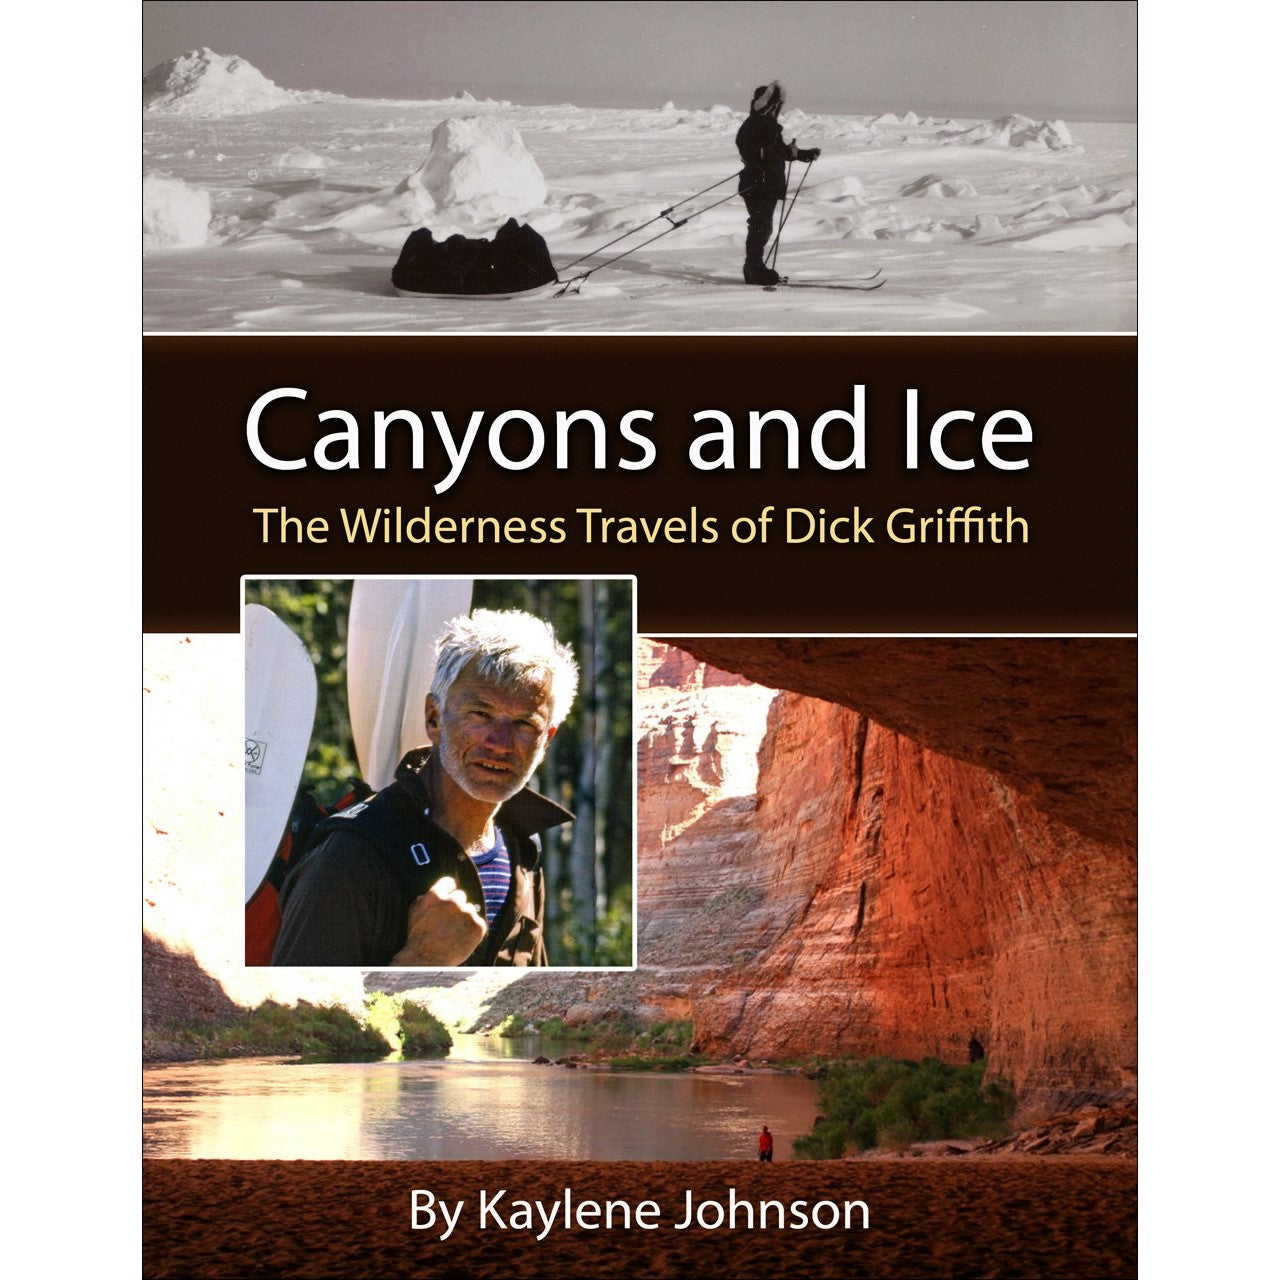 Canyons and Ice: The Wilderness Travels of Dick Griffith